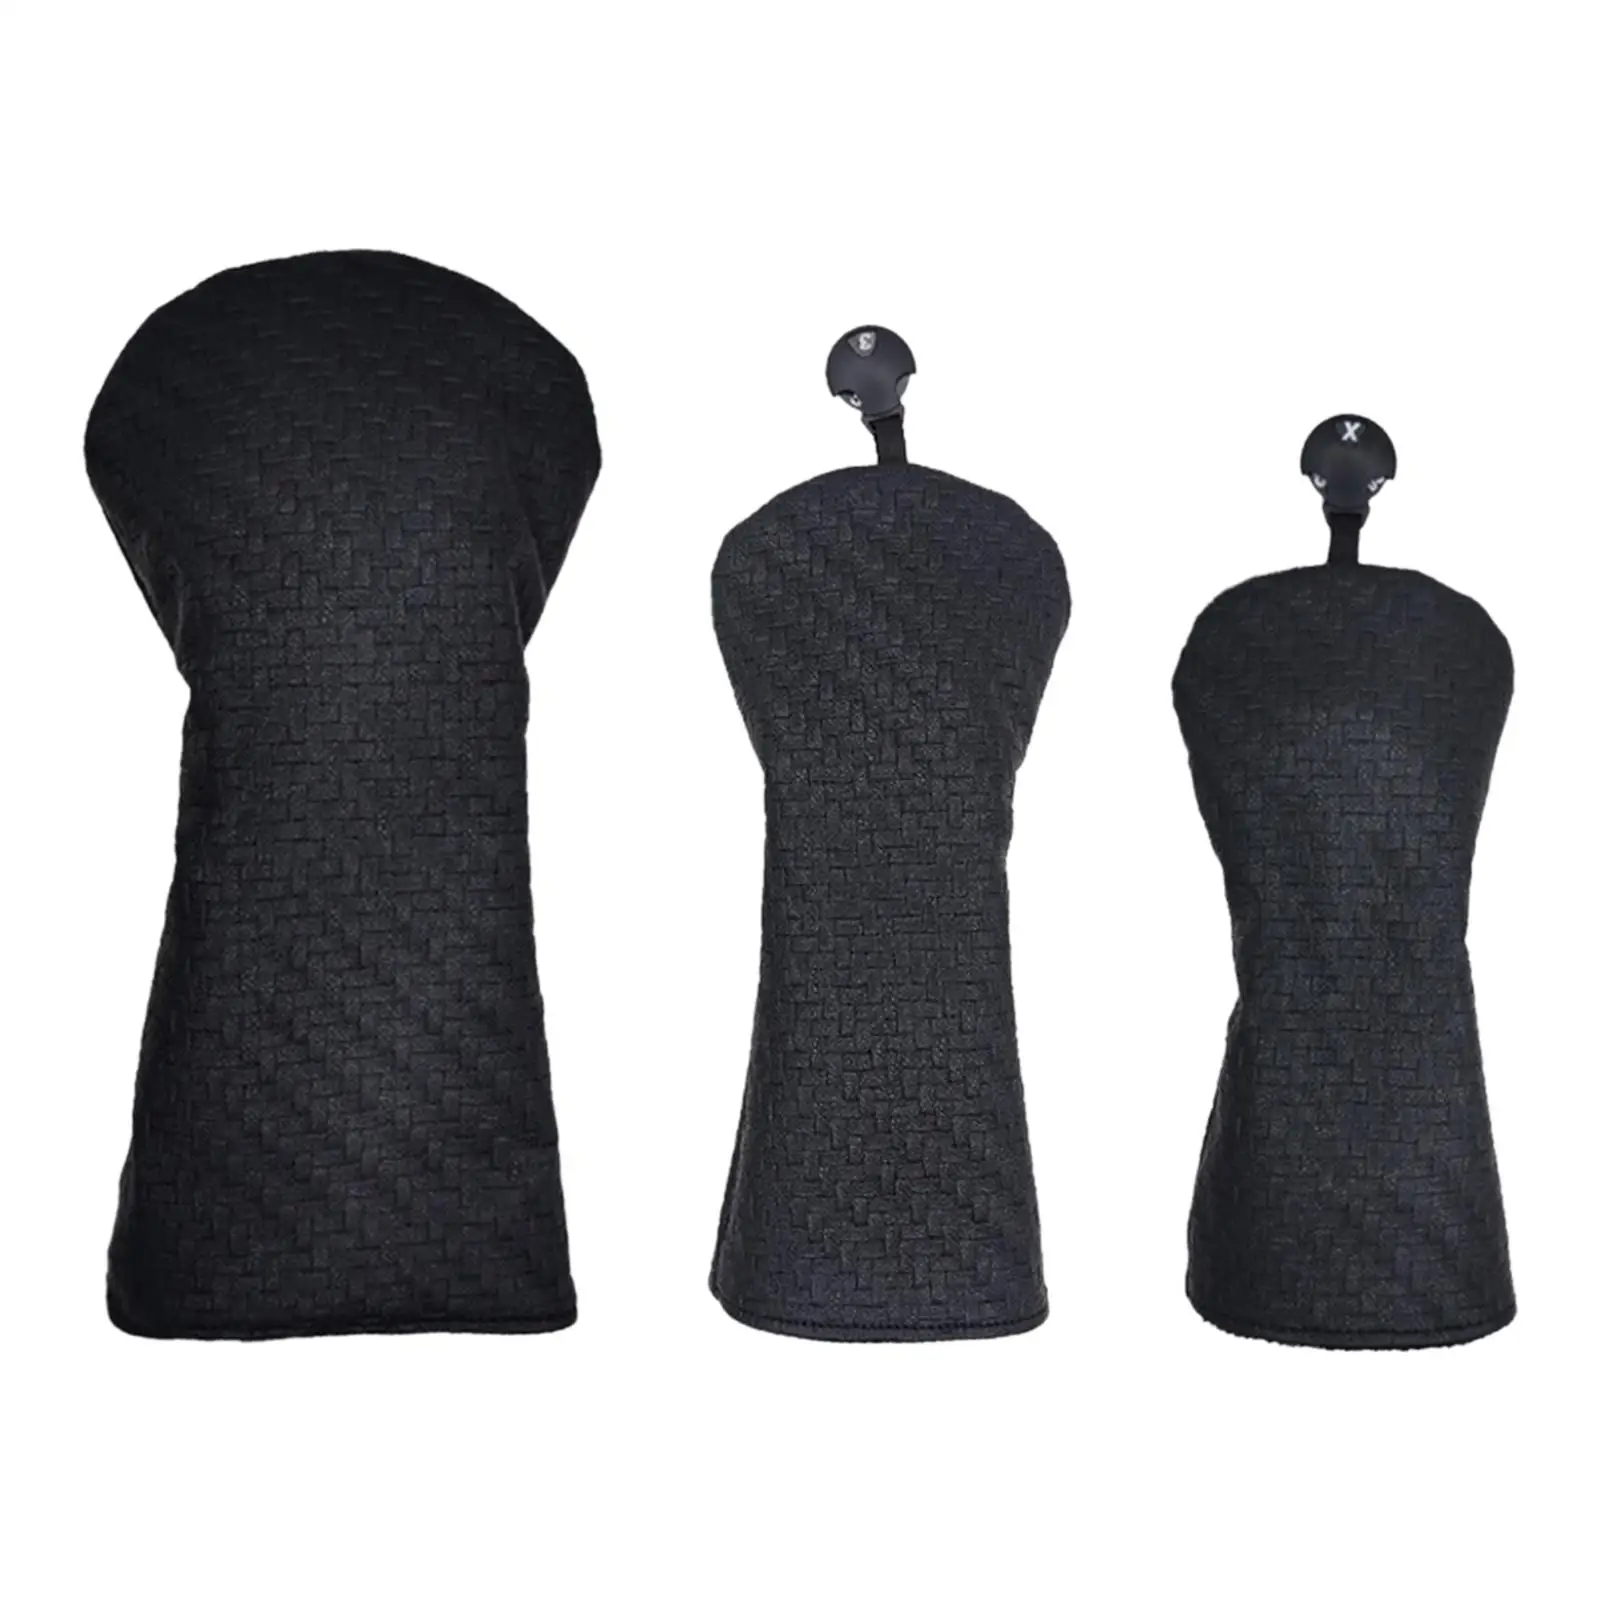 Golf Pole Headcover Equipment Protector Wedges Wrapped for Golf Training